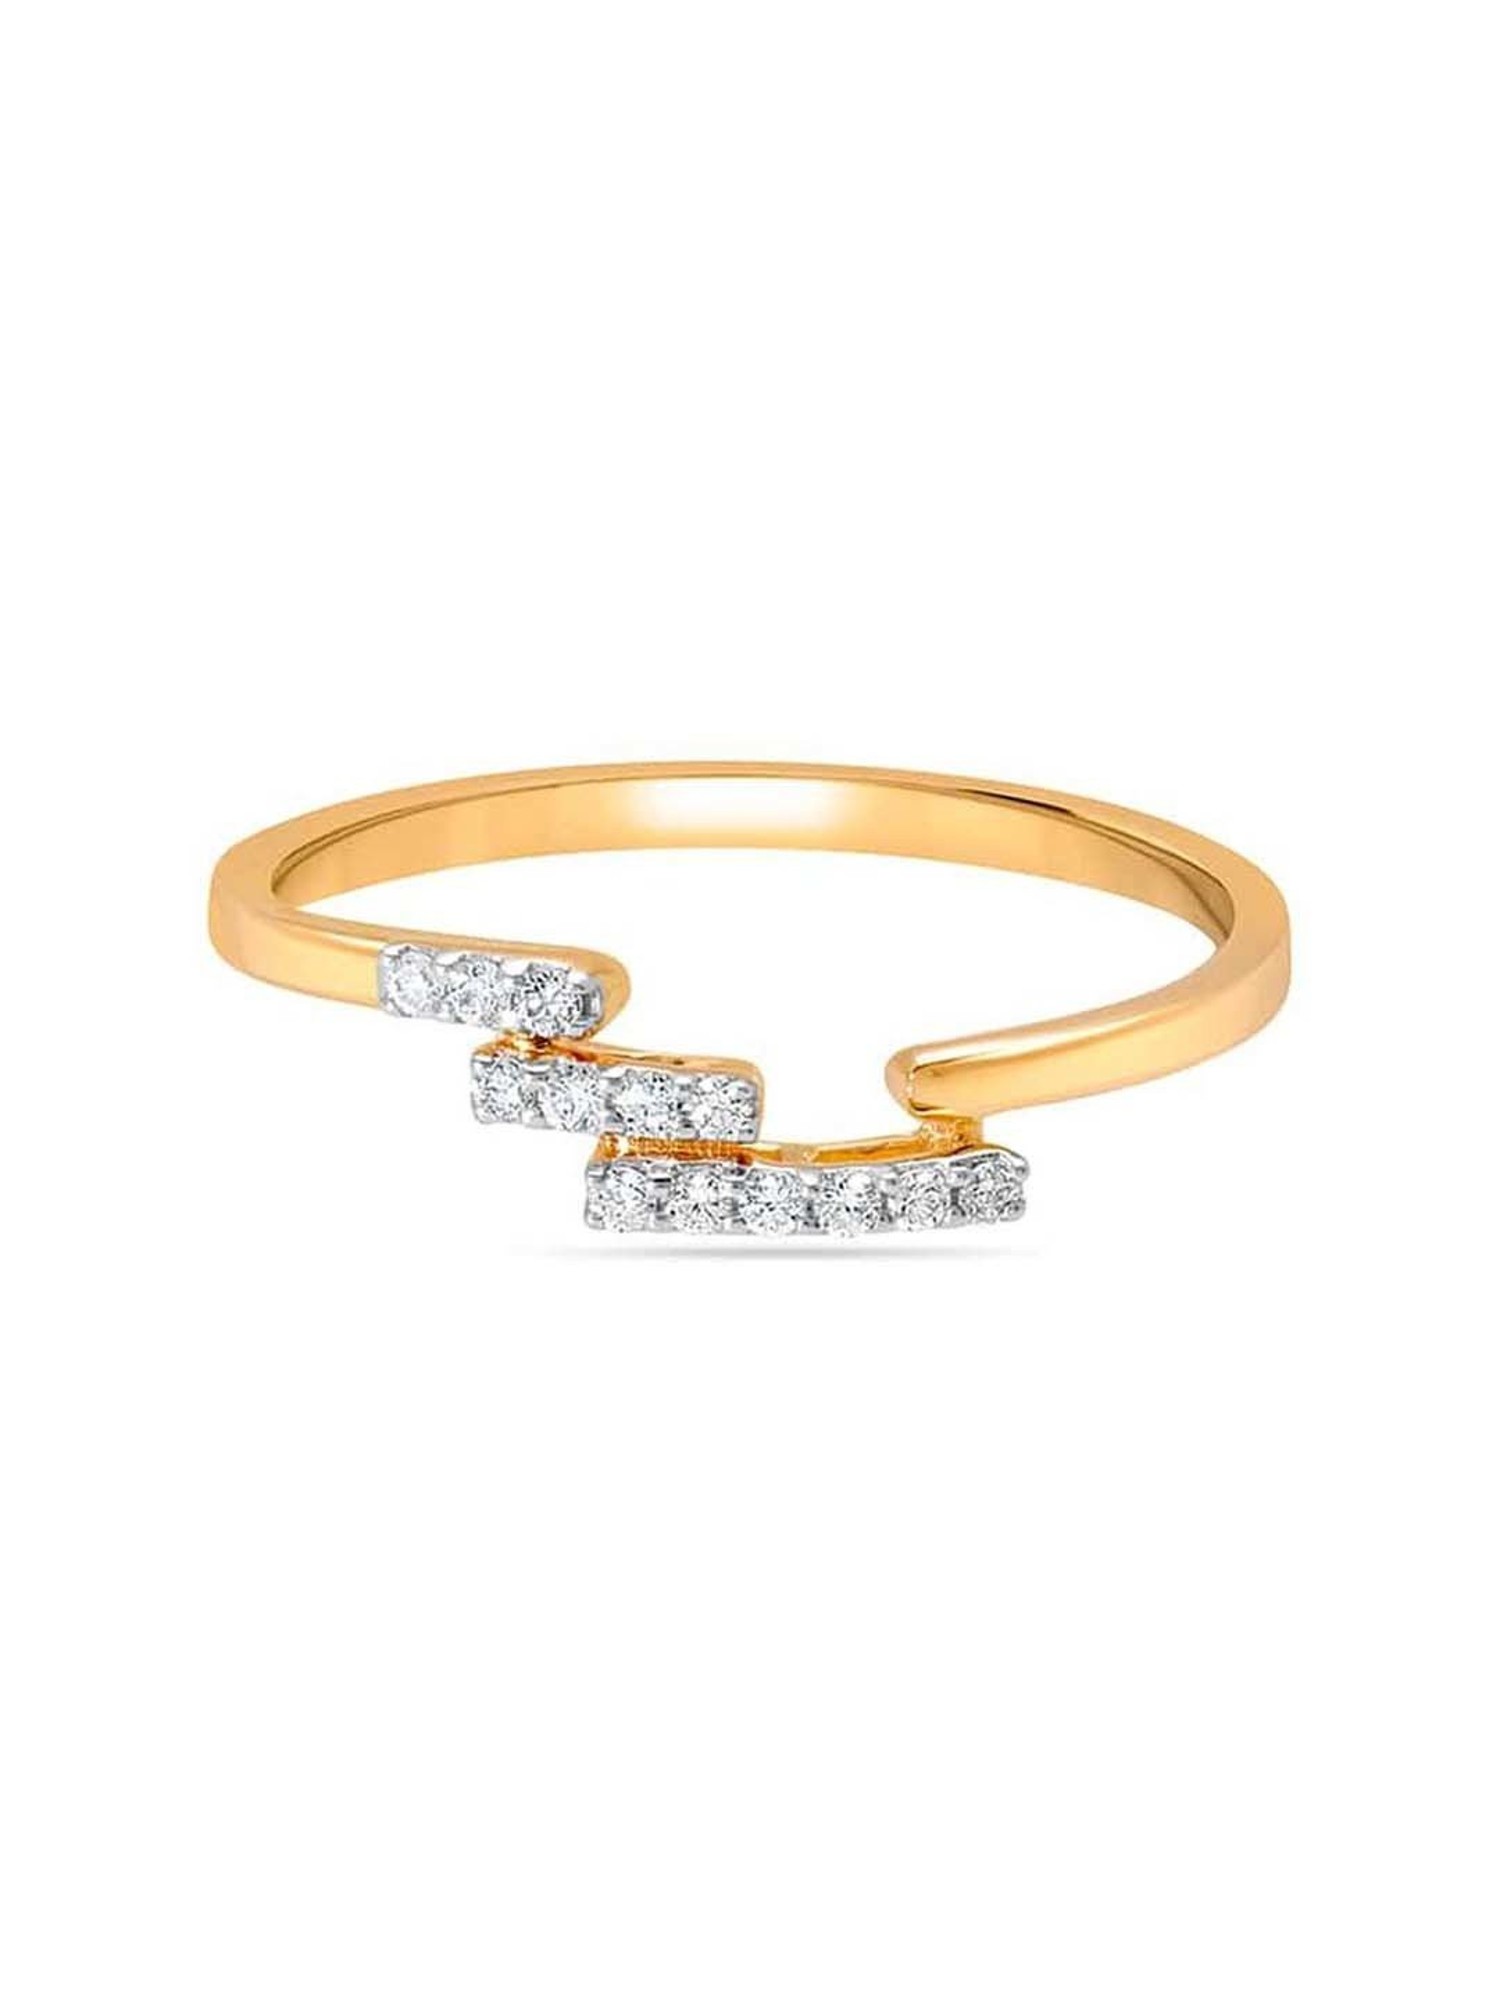 Mia by Tanishq 14KT Yellow Gold and Diamond Ring for Women : Amazon.in:  Fashion